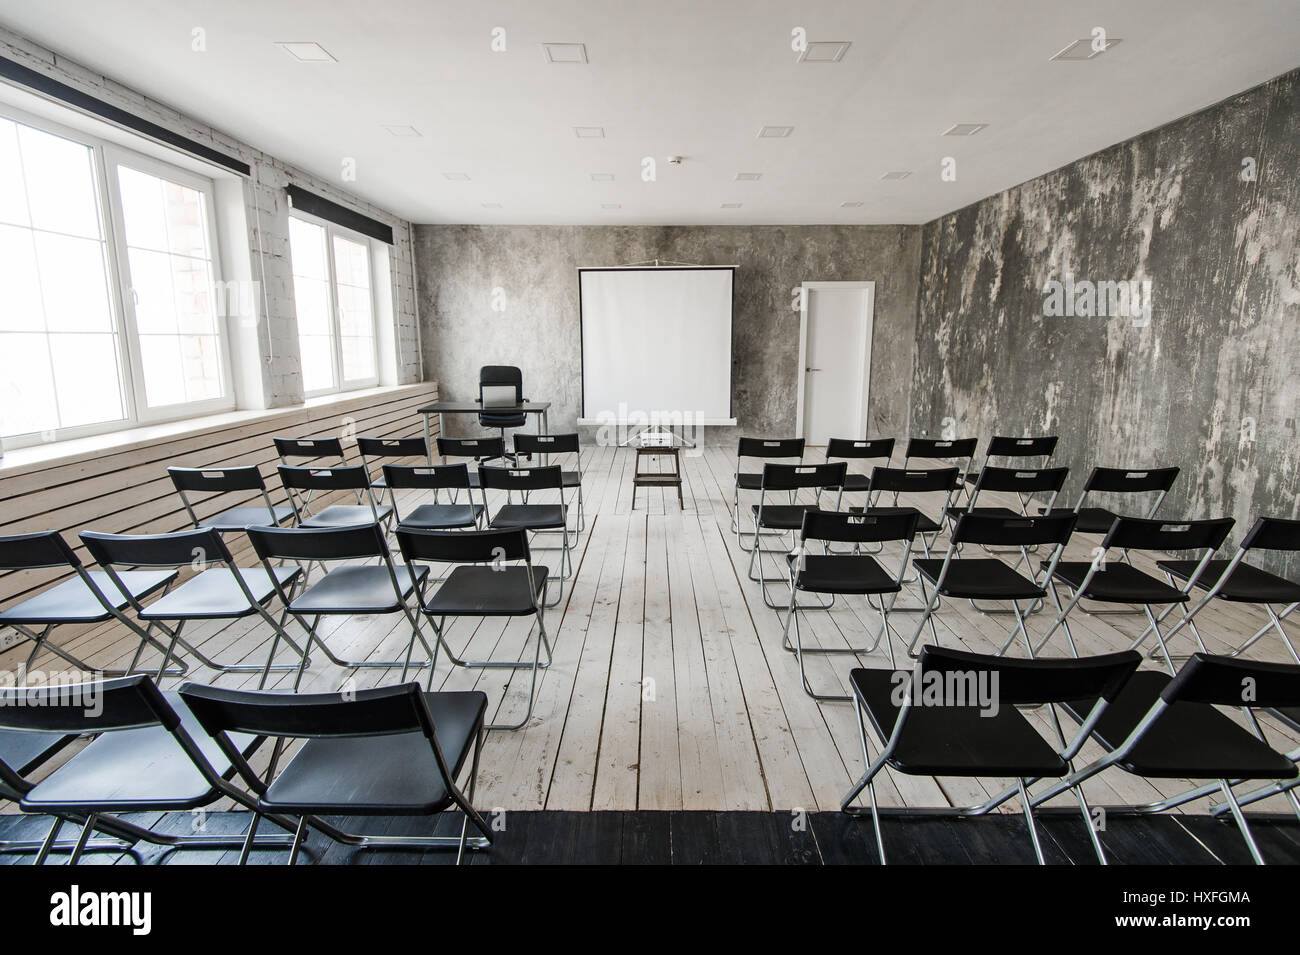 Empty modern classroom with black chairs projector screen Stock Photo